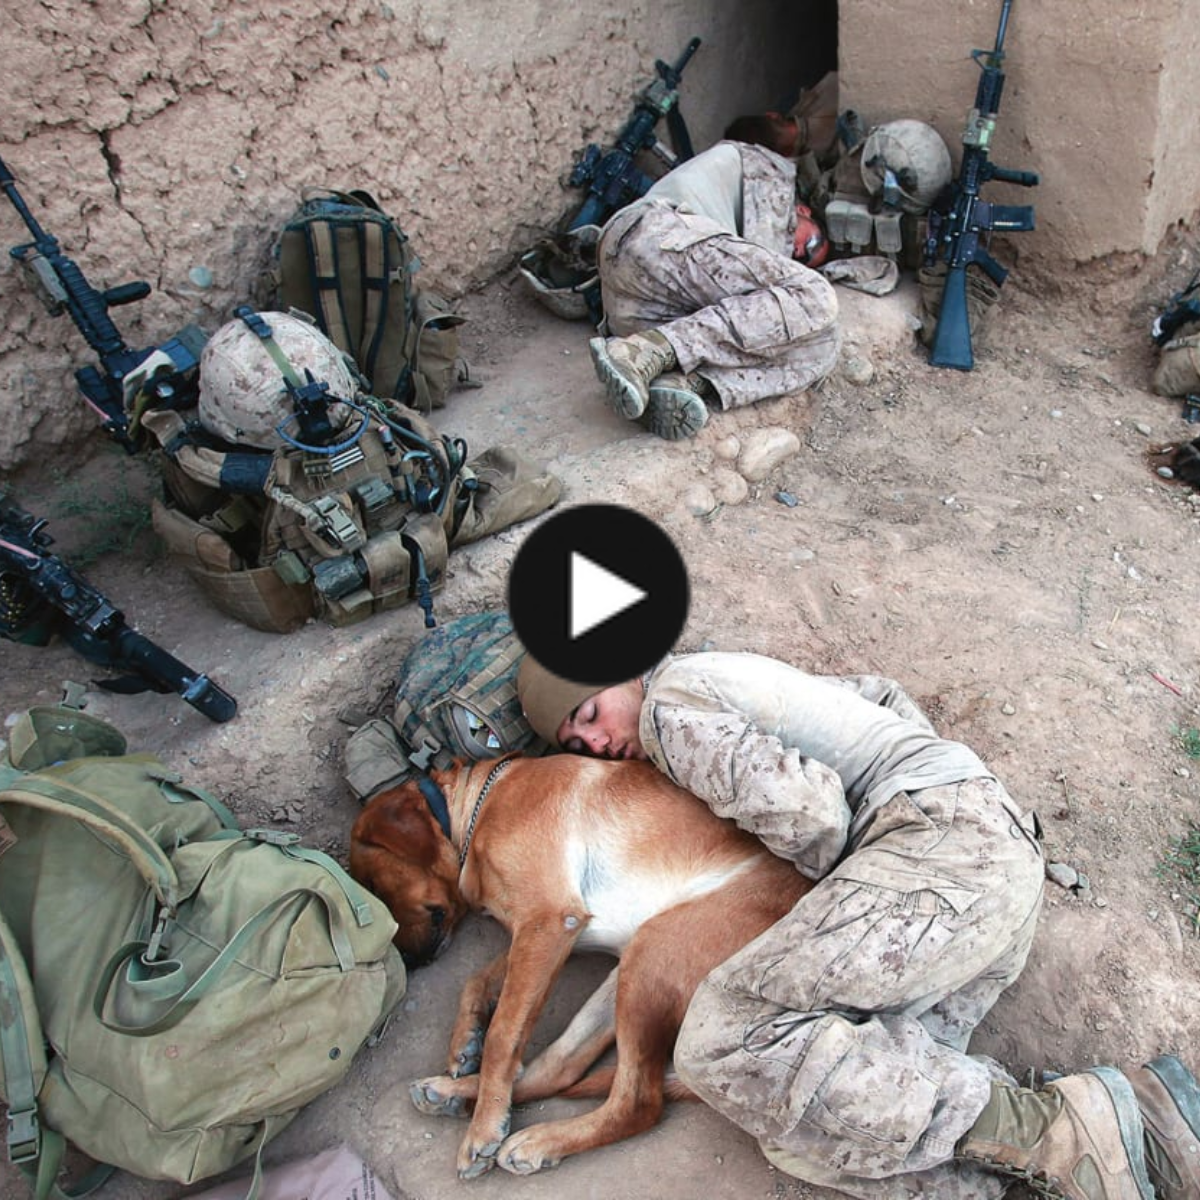 In the middle of chaos: A soldier and his devoted dog, Doggy, have a sweet moment, demonstrating their unbreakable love and touching people’s hearts all across the world.